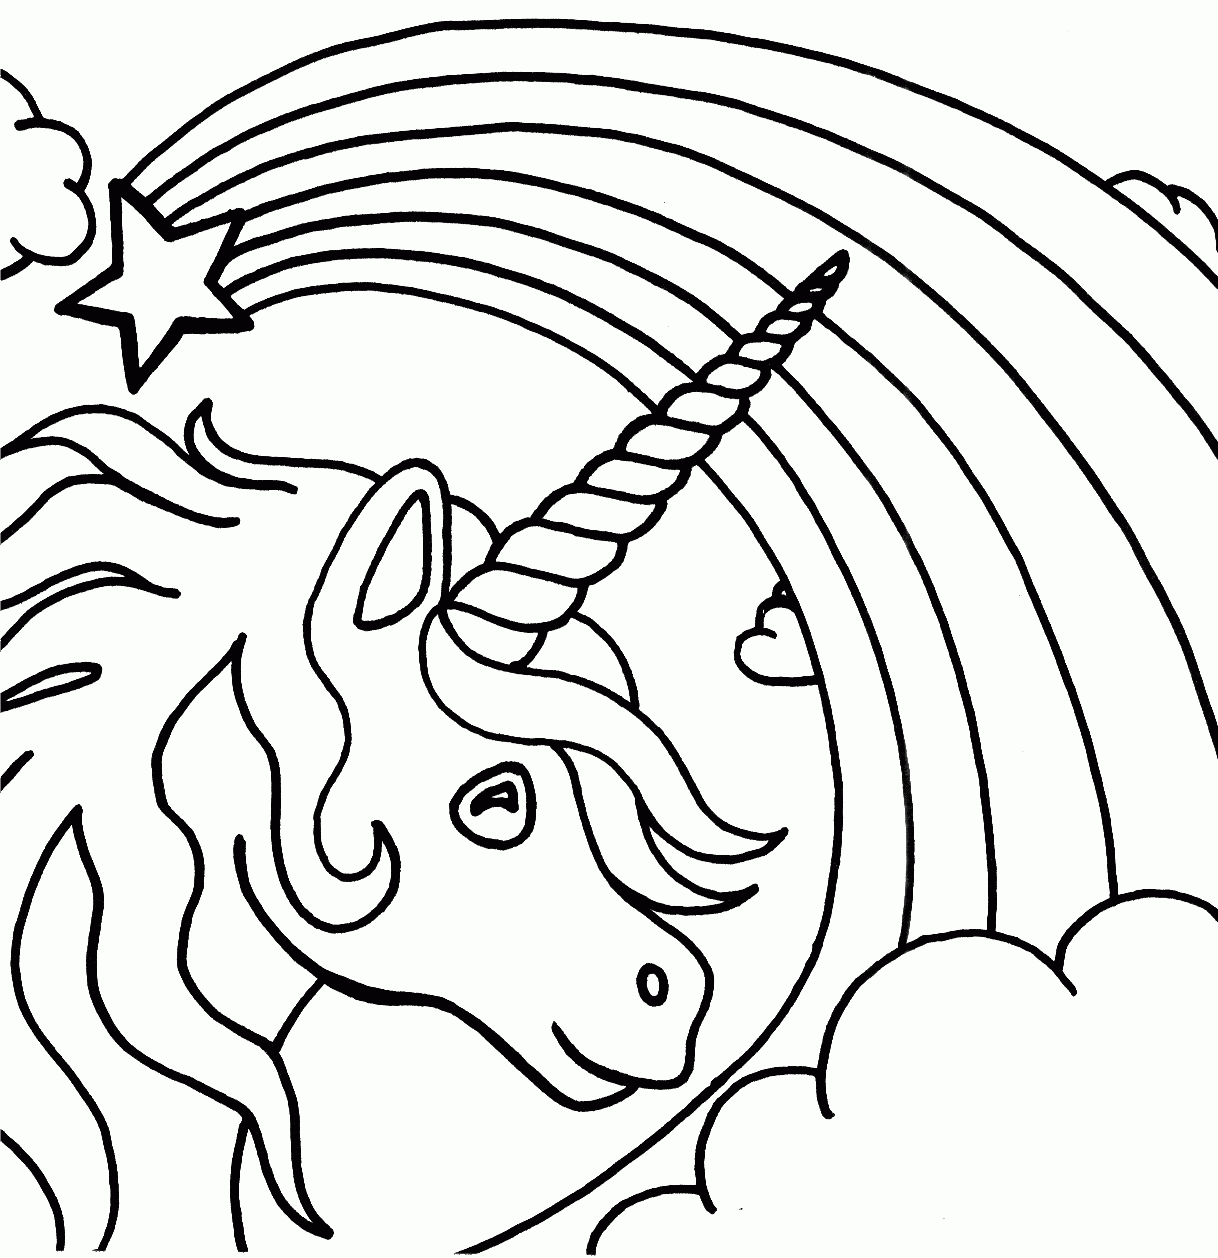 Free Printable Coloring Pages Unicorn, Download Free Printable ...